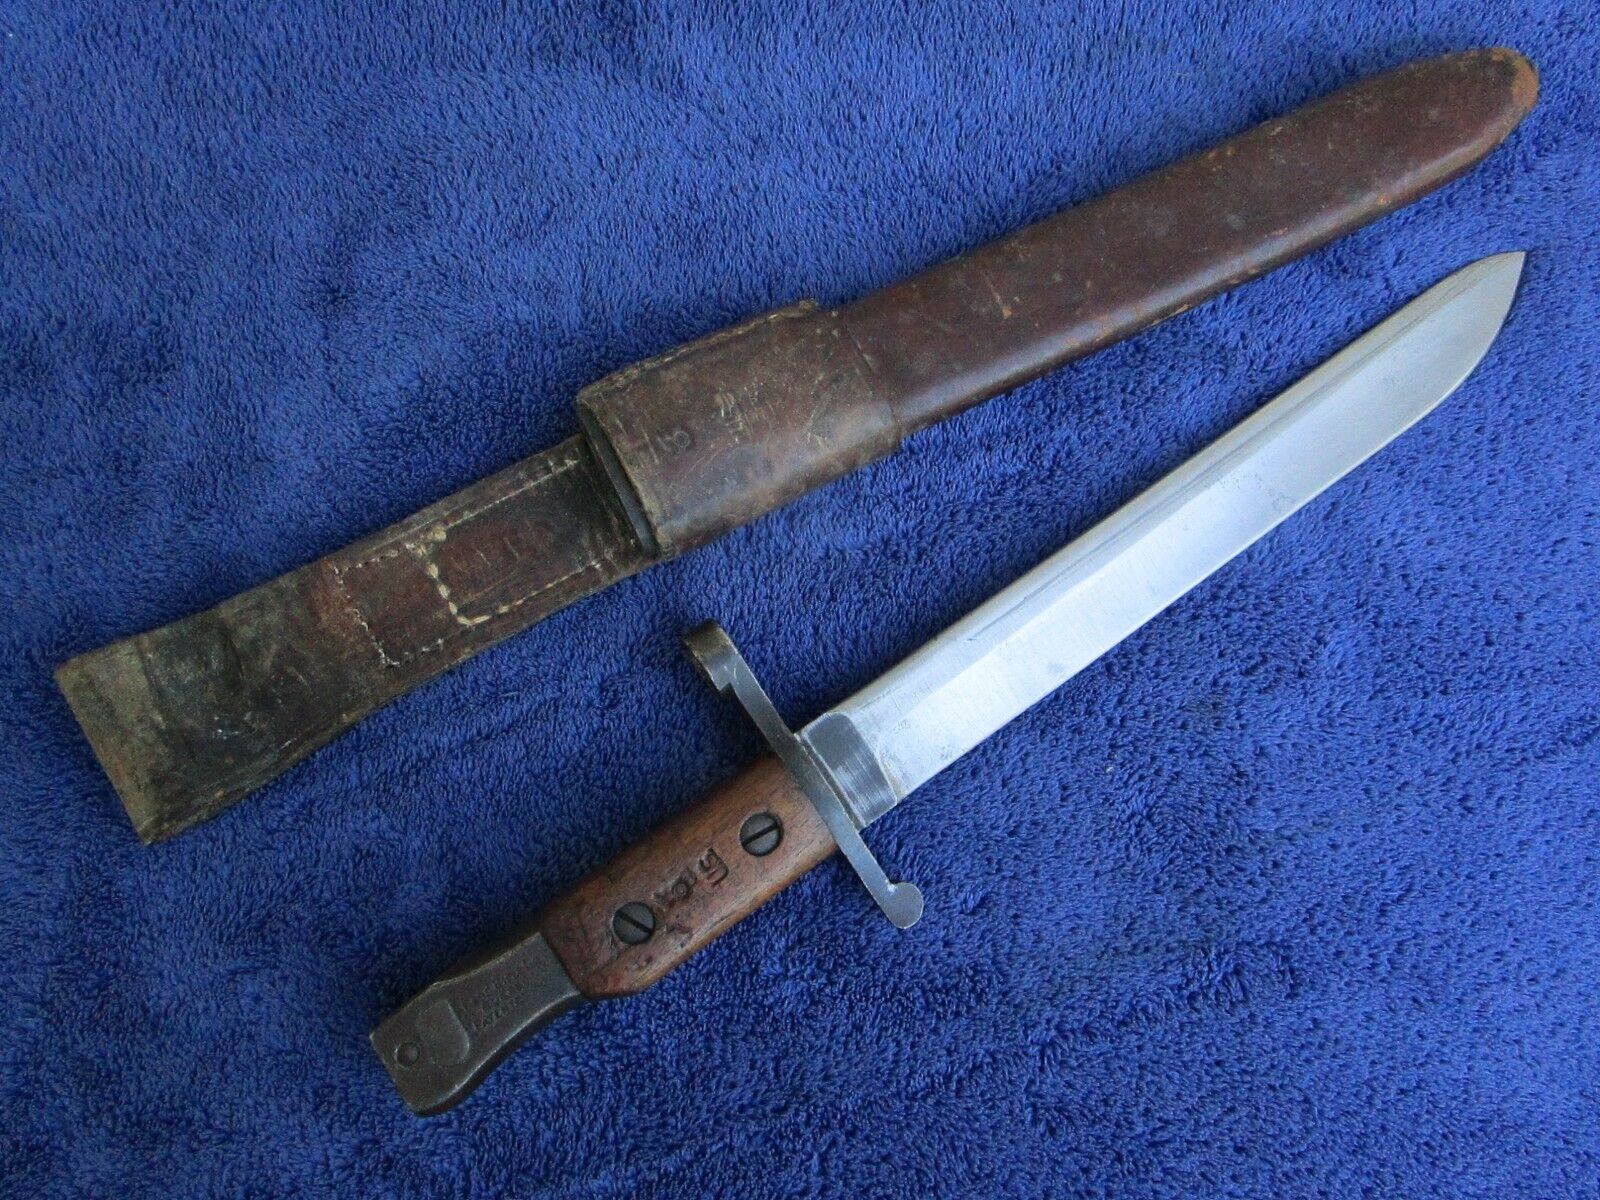 RARE ORIGINAL US MILITARY M1908 CANADIAN ROSS BAYONET AND SCABBARD WITH FROG